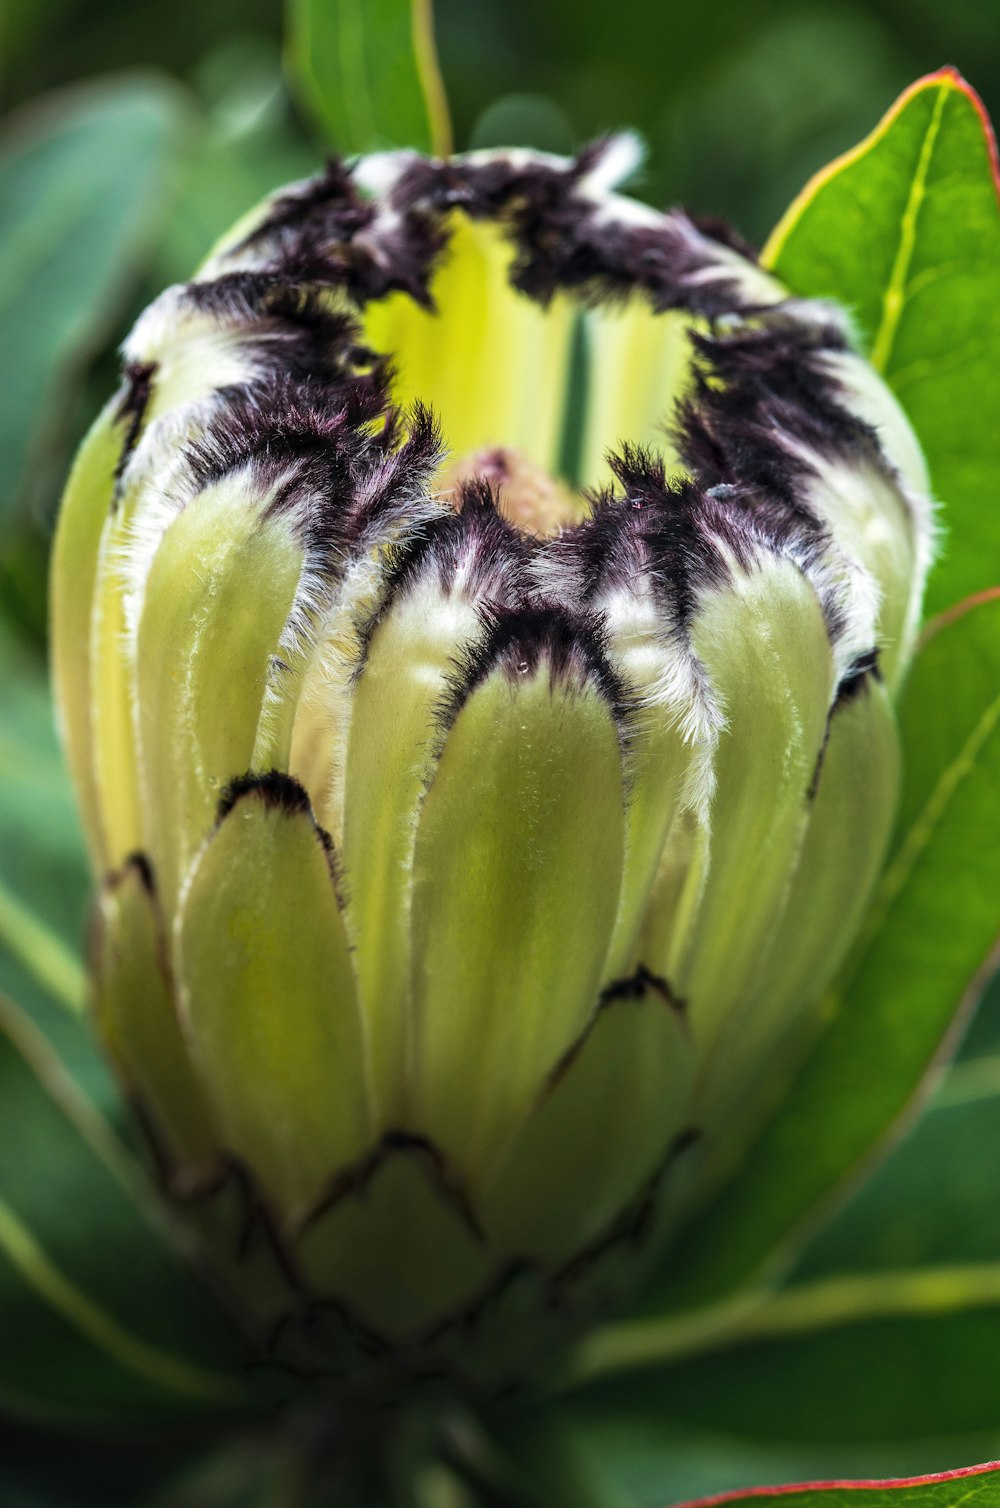 green and black flower bud